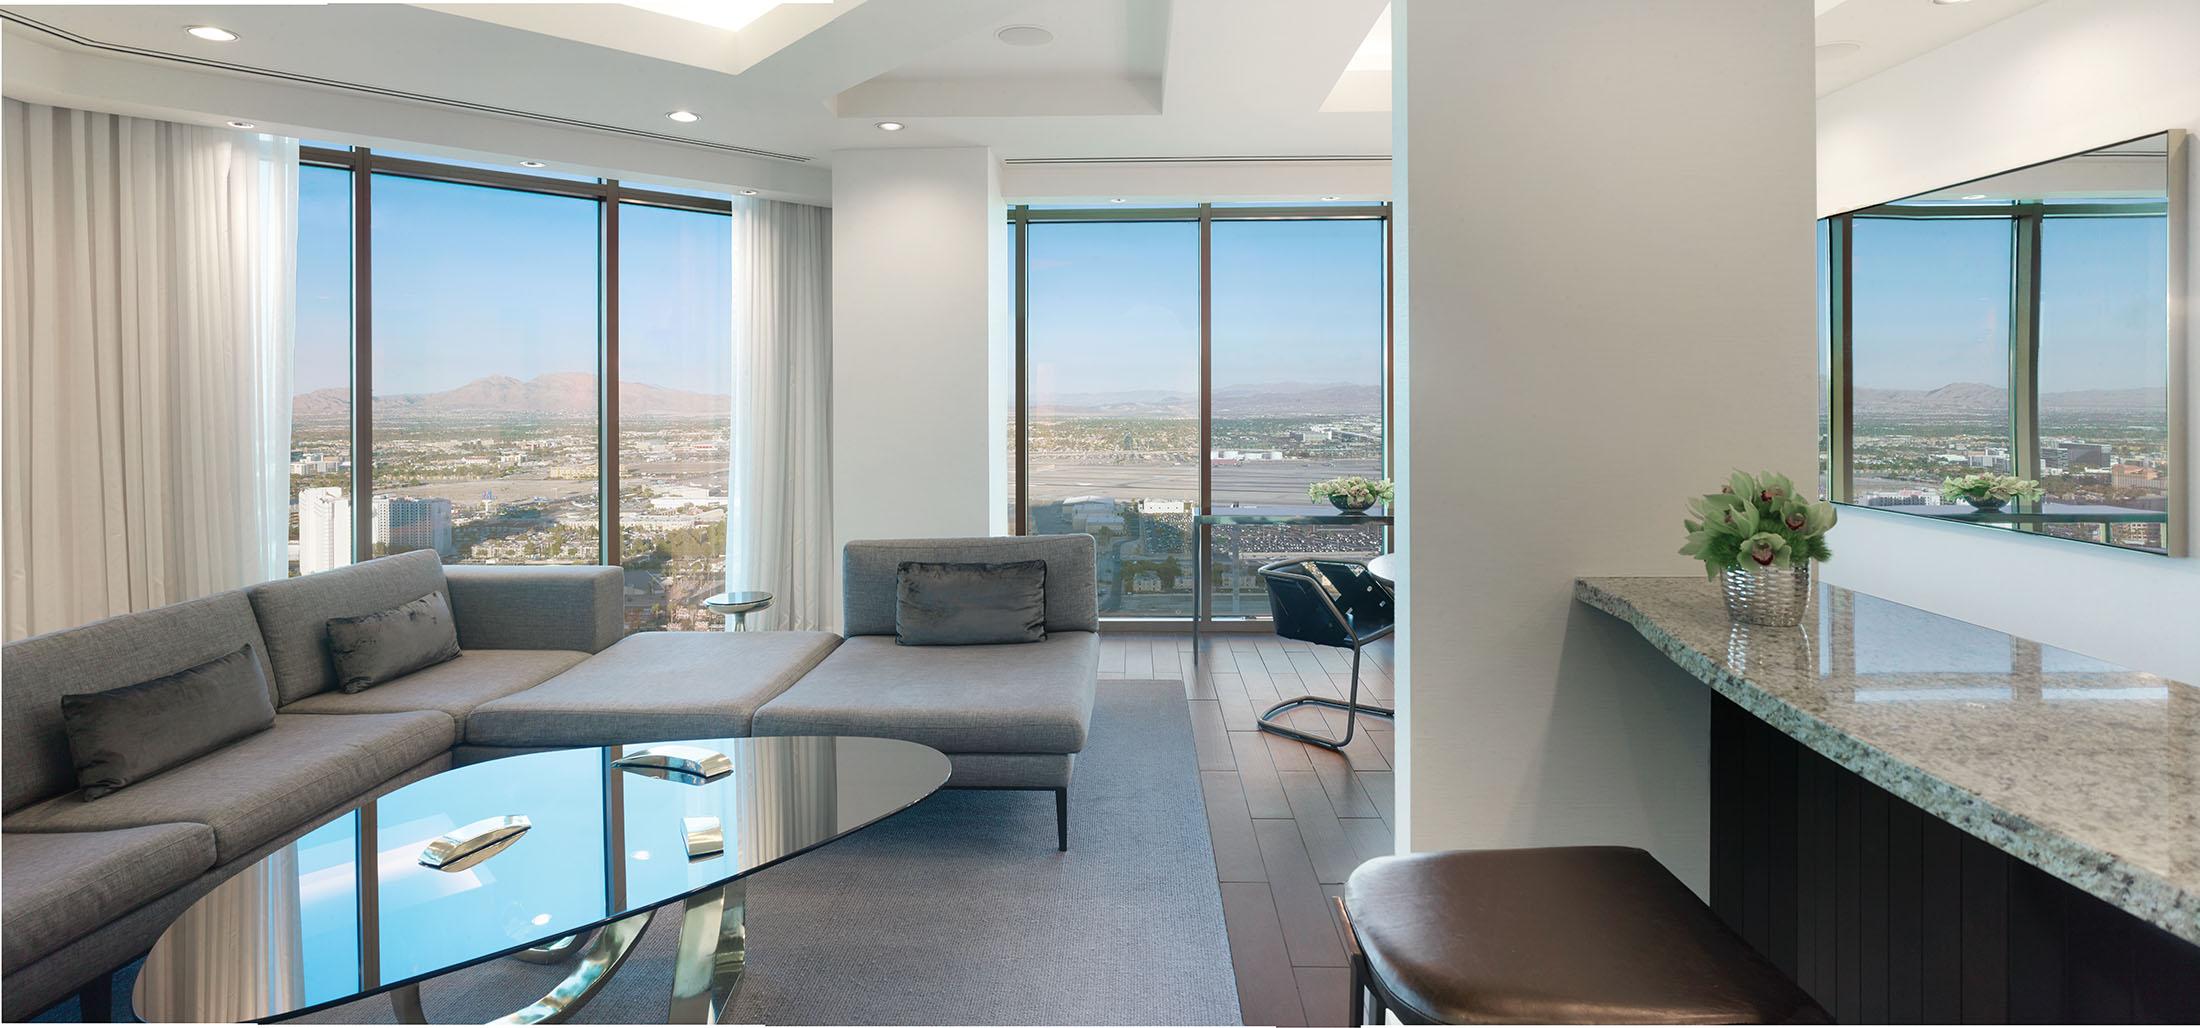 Living room and kitchen suite with panoramic views of Las Vegas